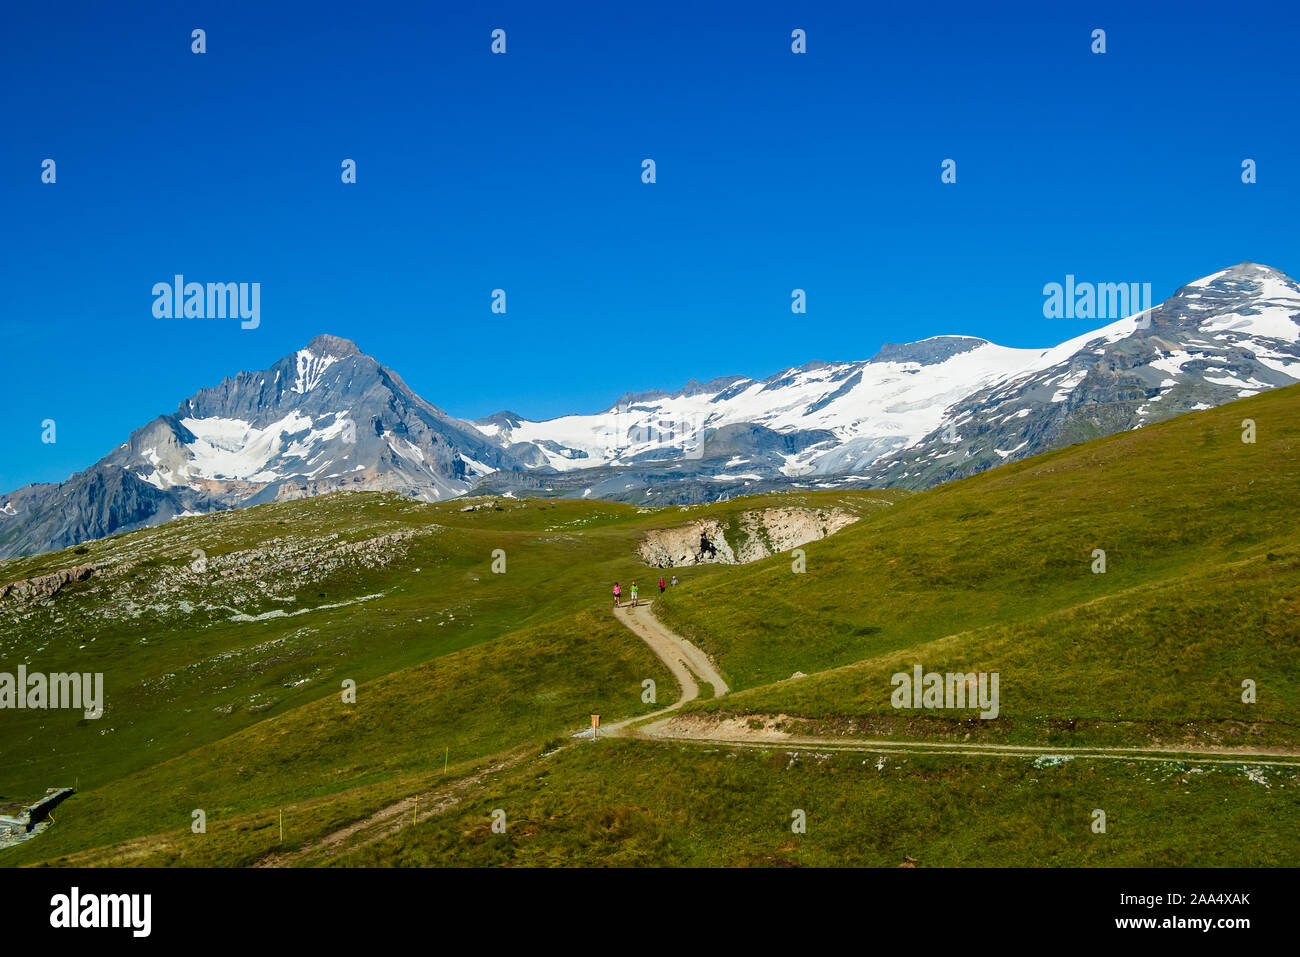 Summer Alpine landscape in French Alps. Hiking trail with wondering tourists in the far distance. Green alpine pastures and mountain with snowy slopes Stock Photo